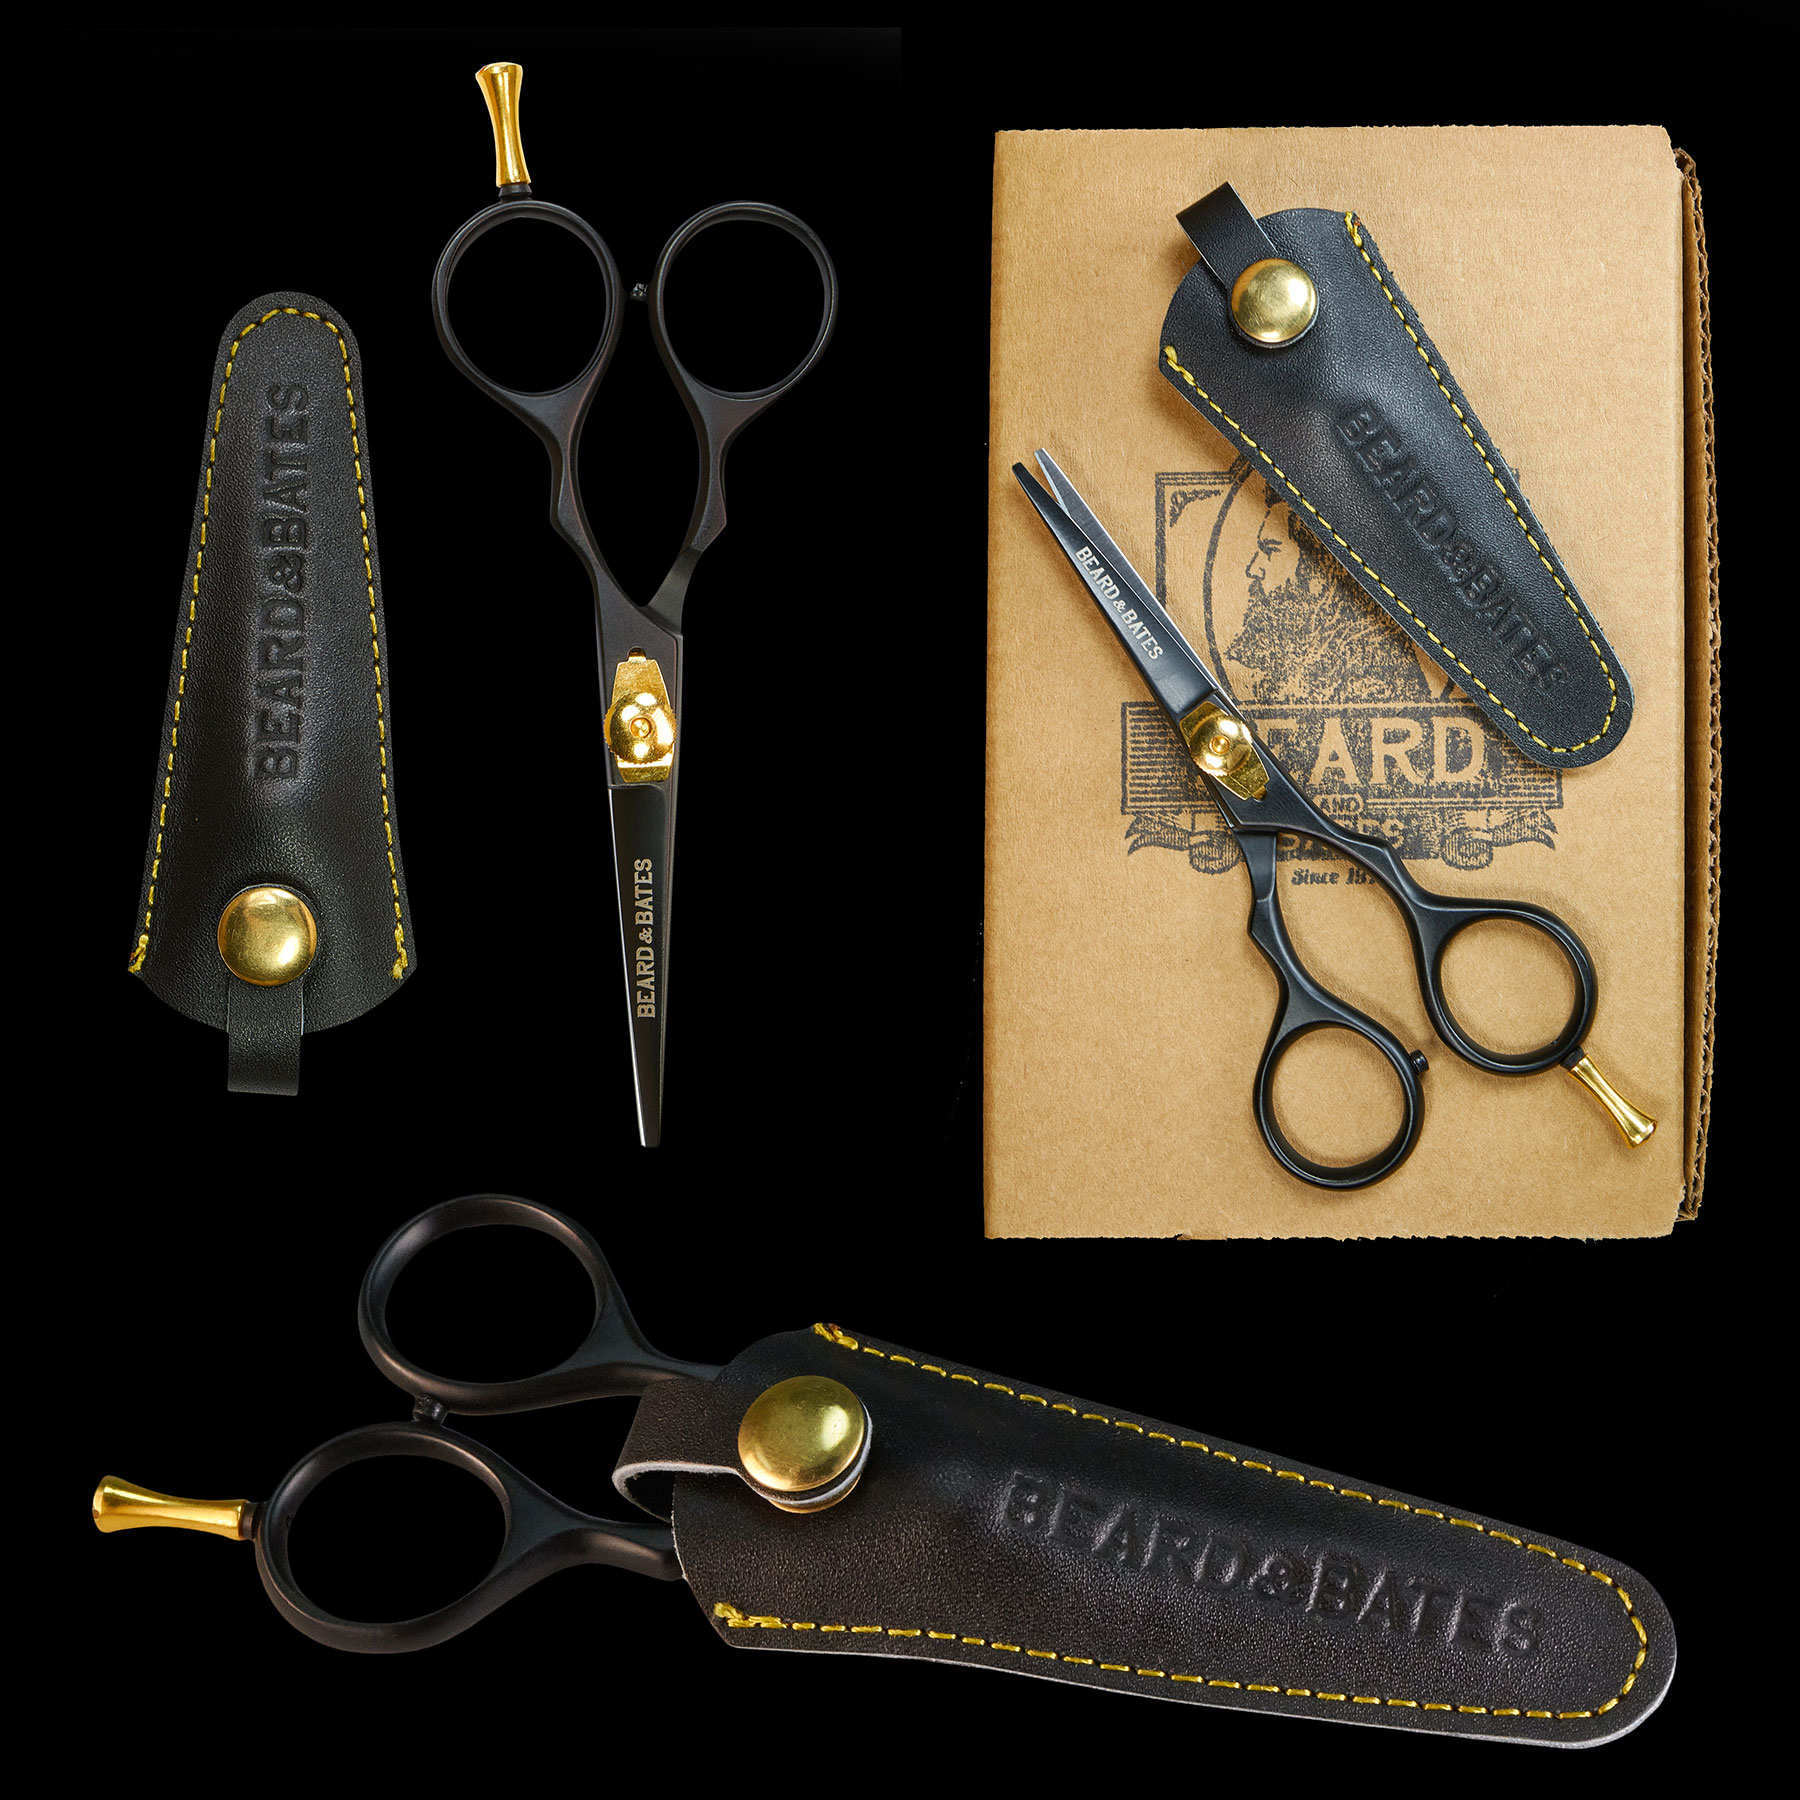 1878 Black Label Shears - Premium Grooming Scissors with Leather Holster